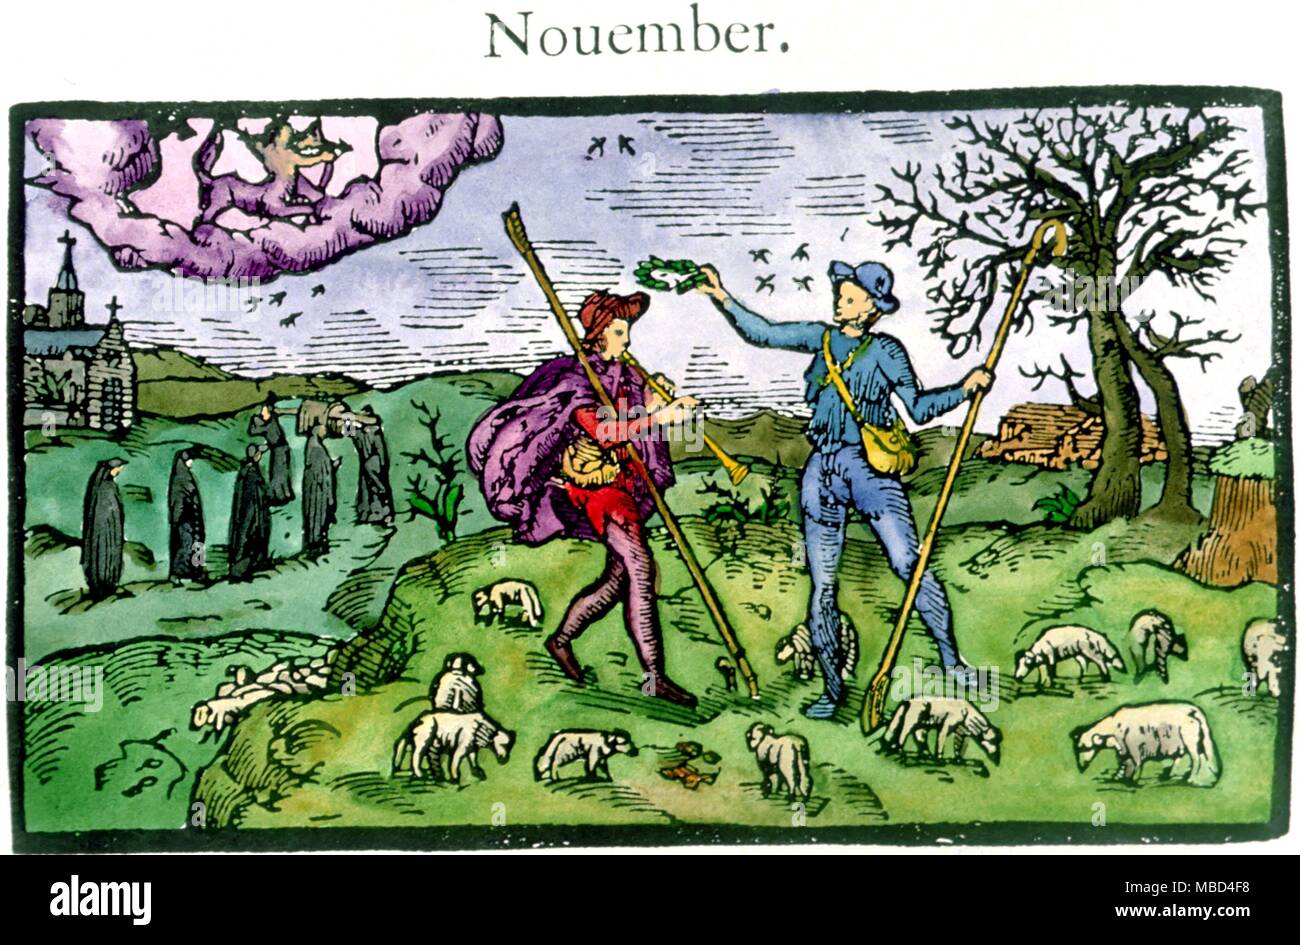 he horseman of Sagittarius, of the month of November. From the series of months used as vignettes in Edmund Spenser's The Fairie Queene, derived from his Shepheard's Calendar of 1579 - ©© /Charles Walker Stock Photo